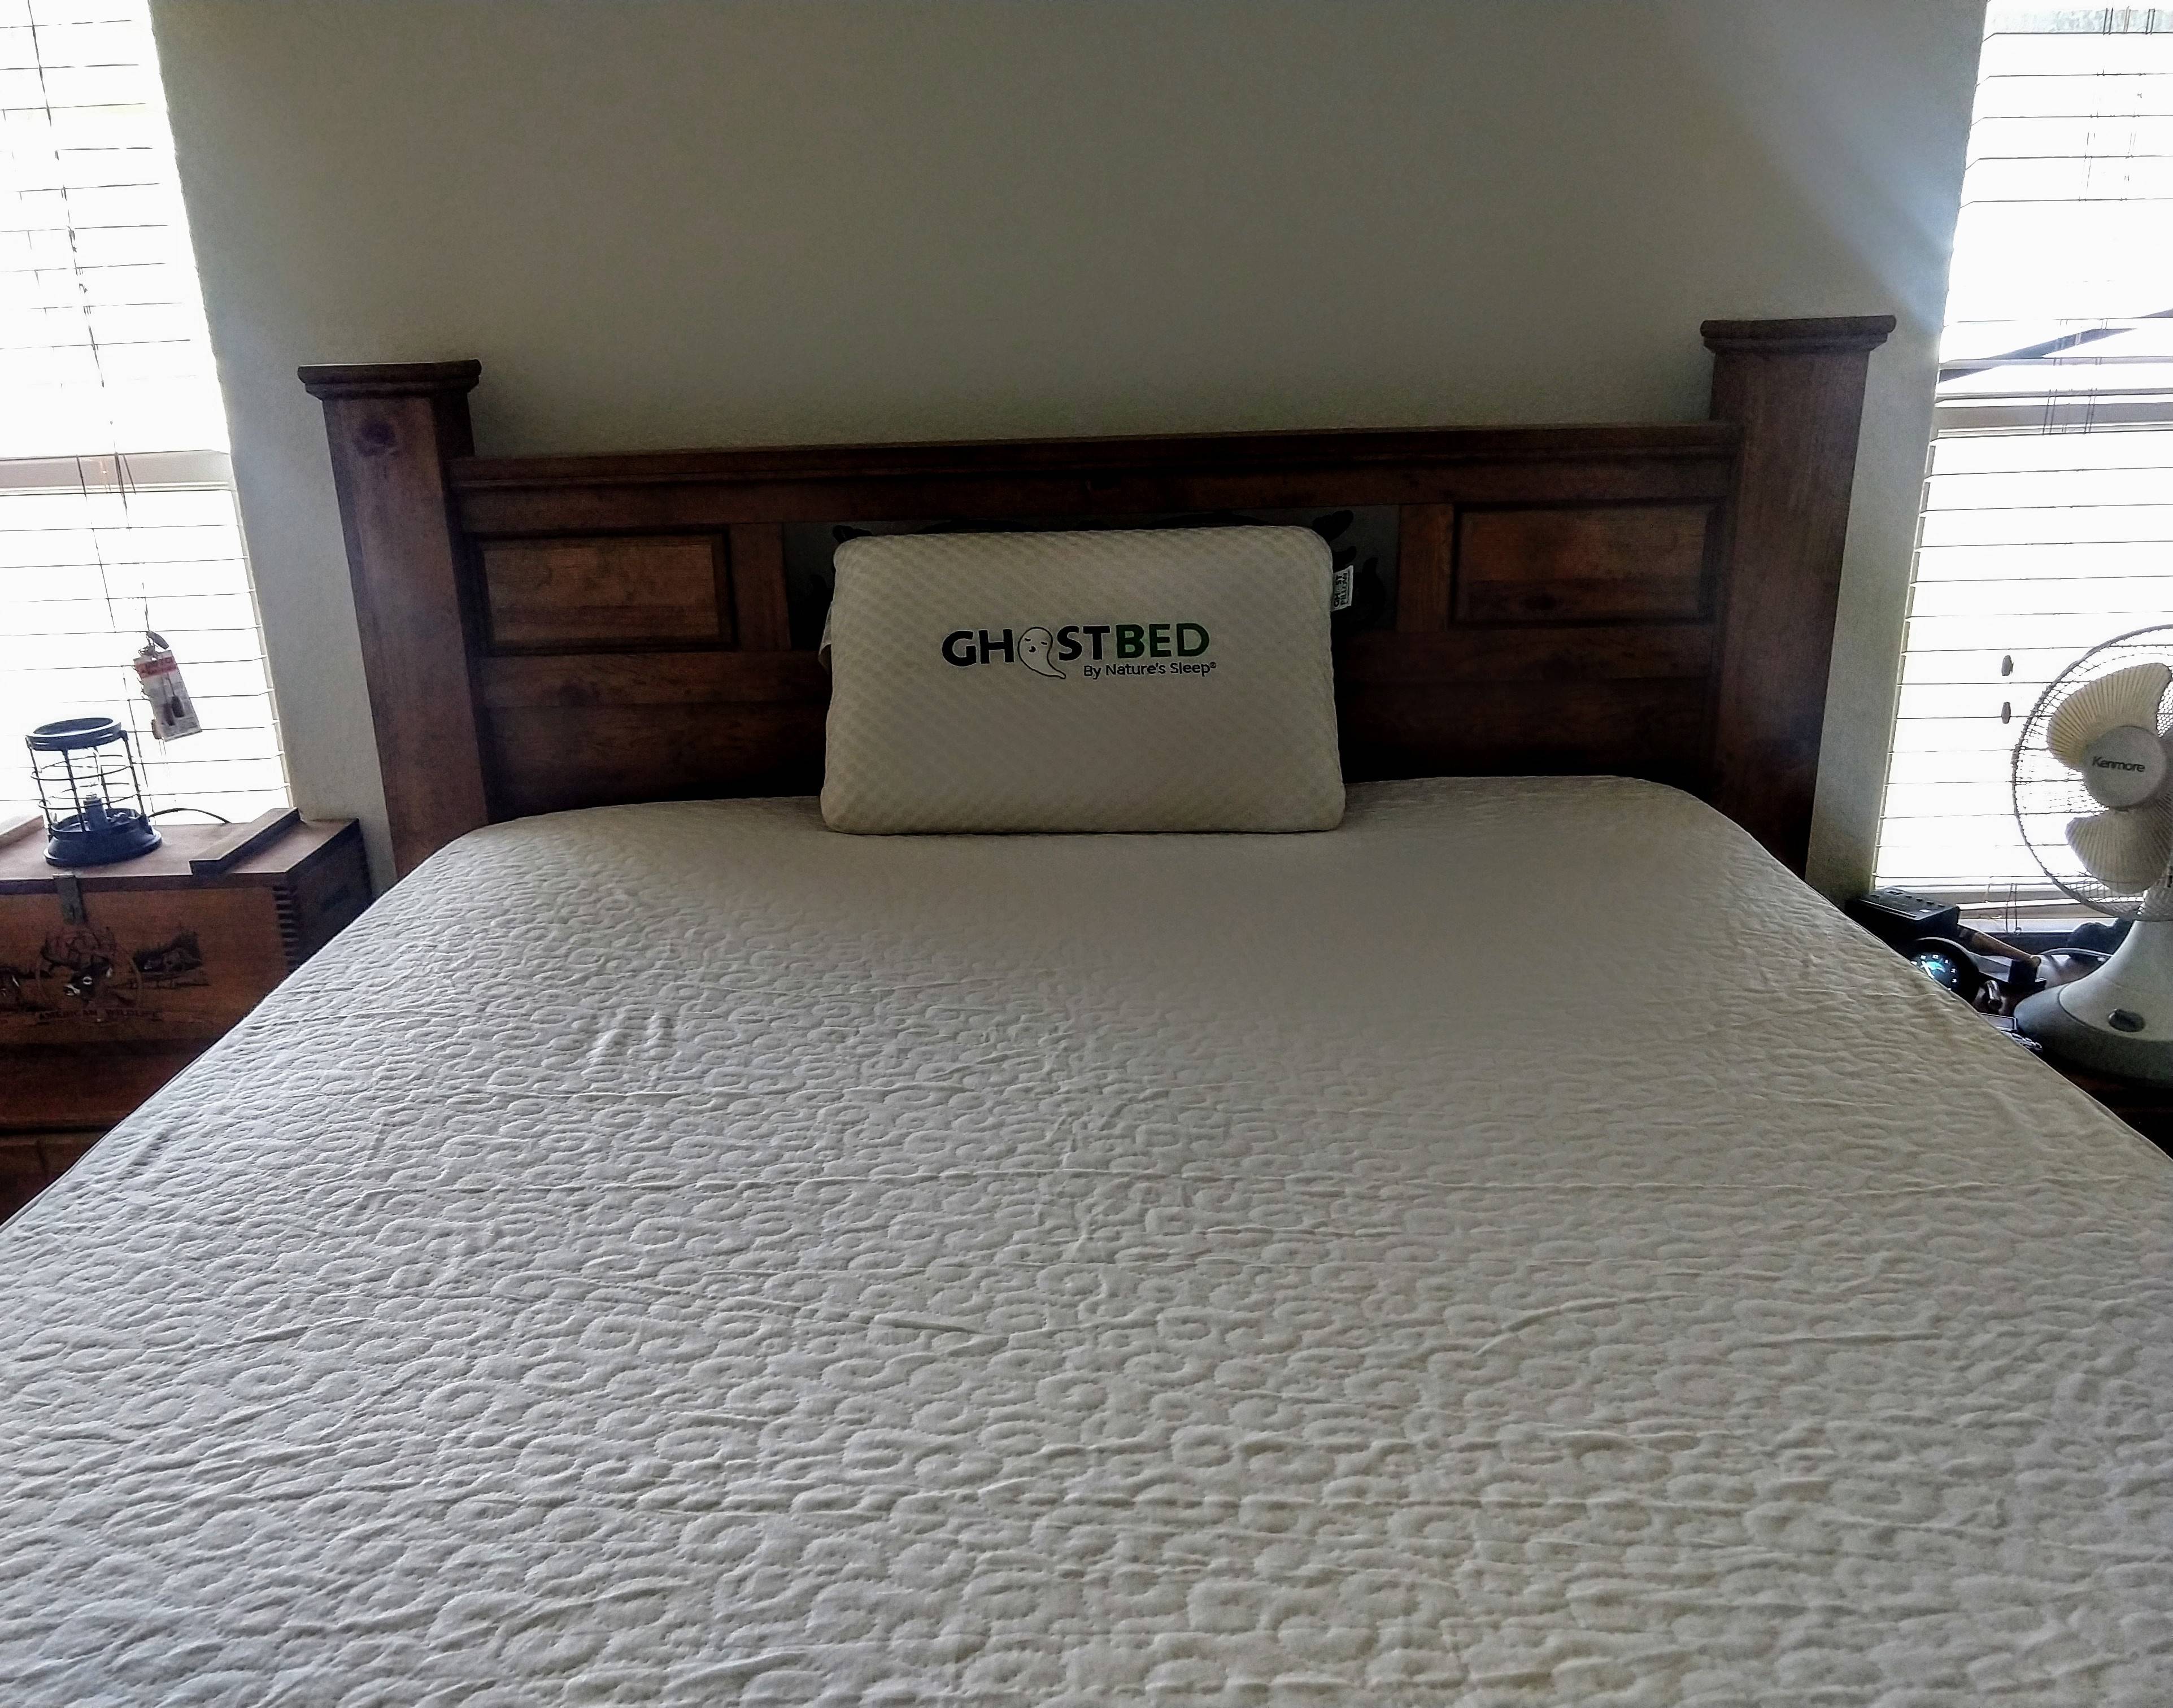 washing ghostbed mattress protector